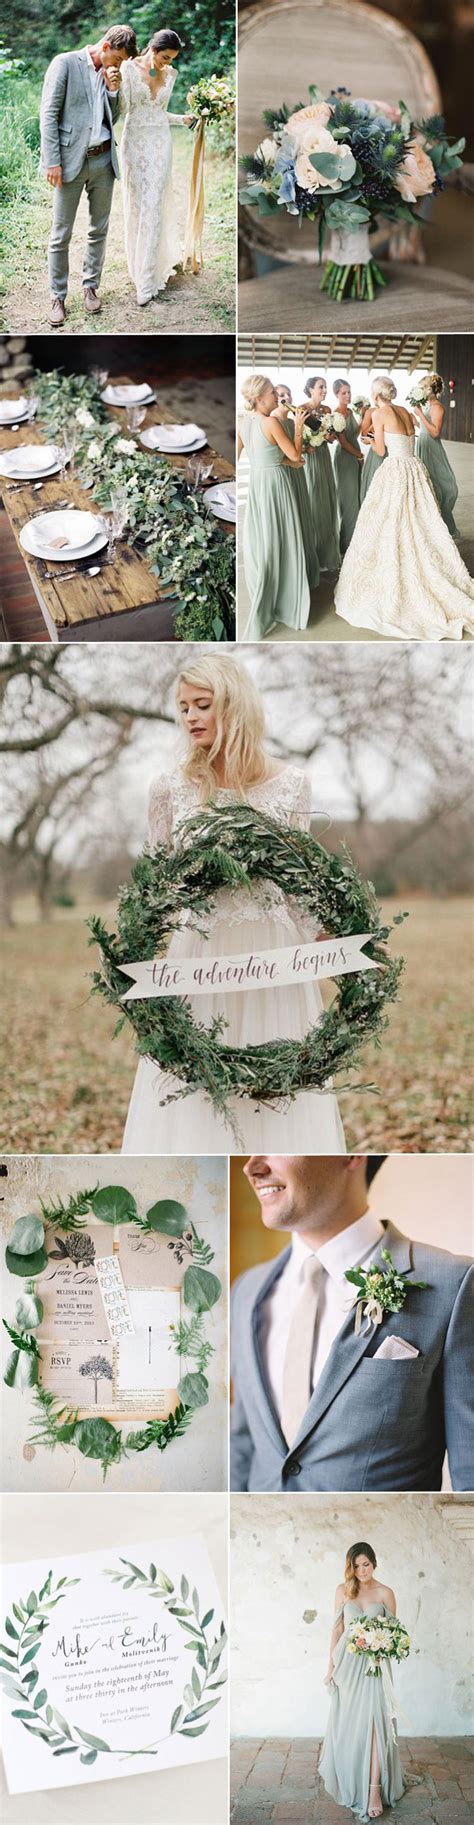 Wedding Color Inspiration For Sage Greens And Tans